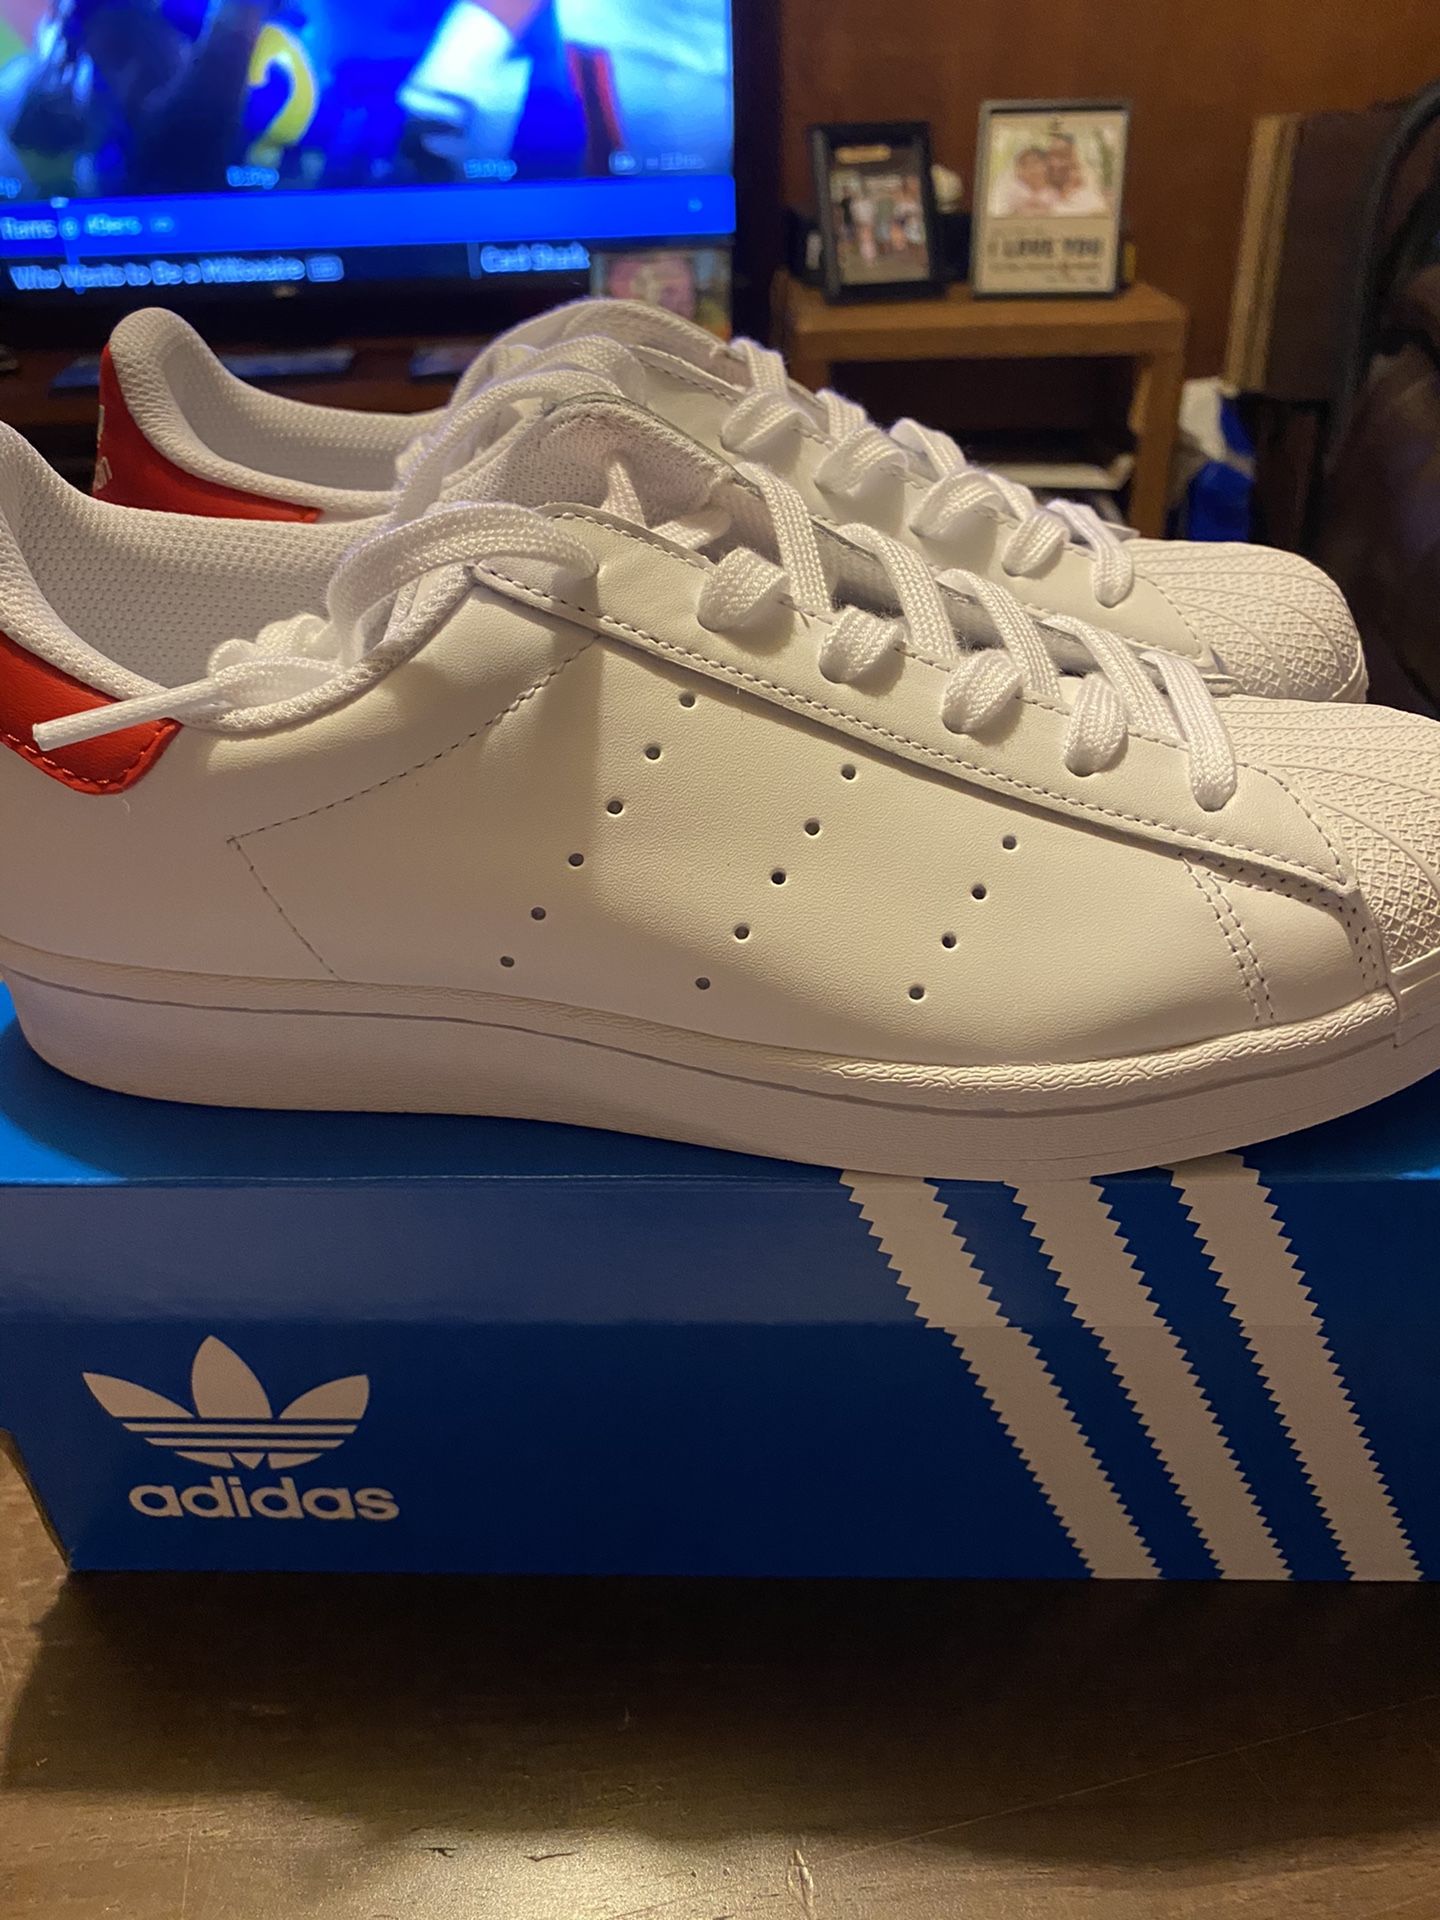 Women’s Adidas Shoes. Superstar Stan Smith. Size: 7.